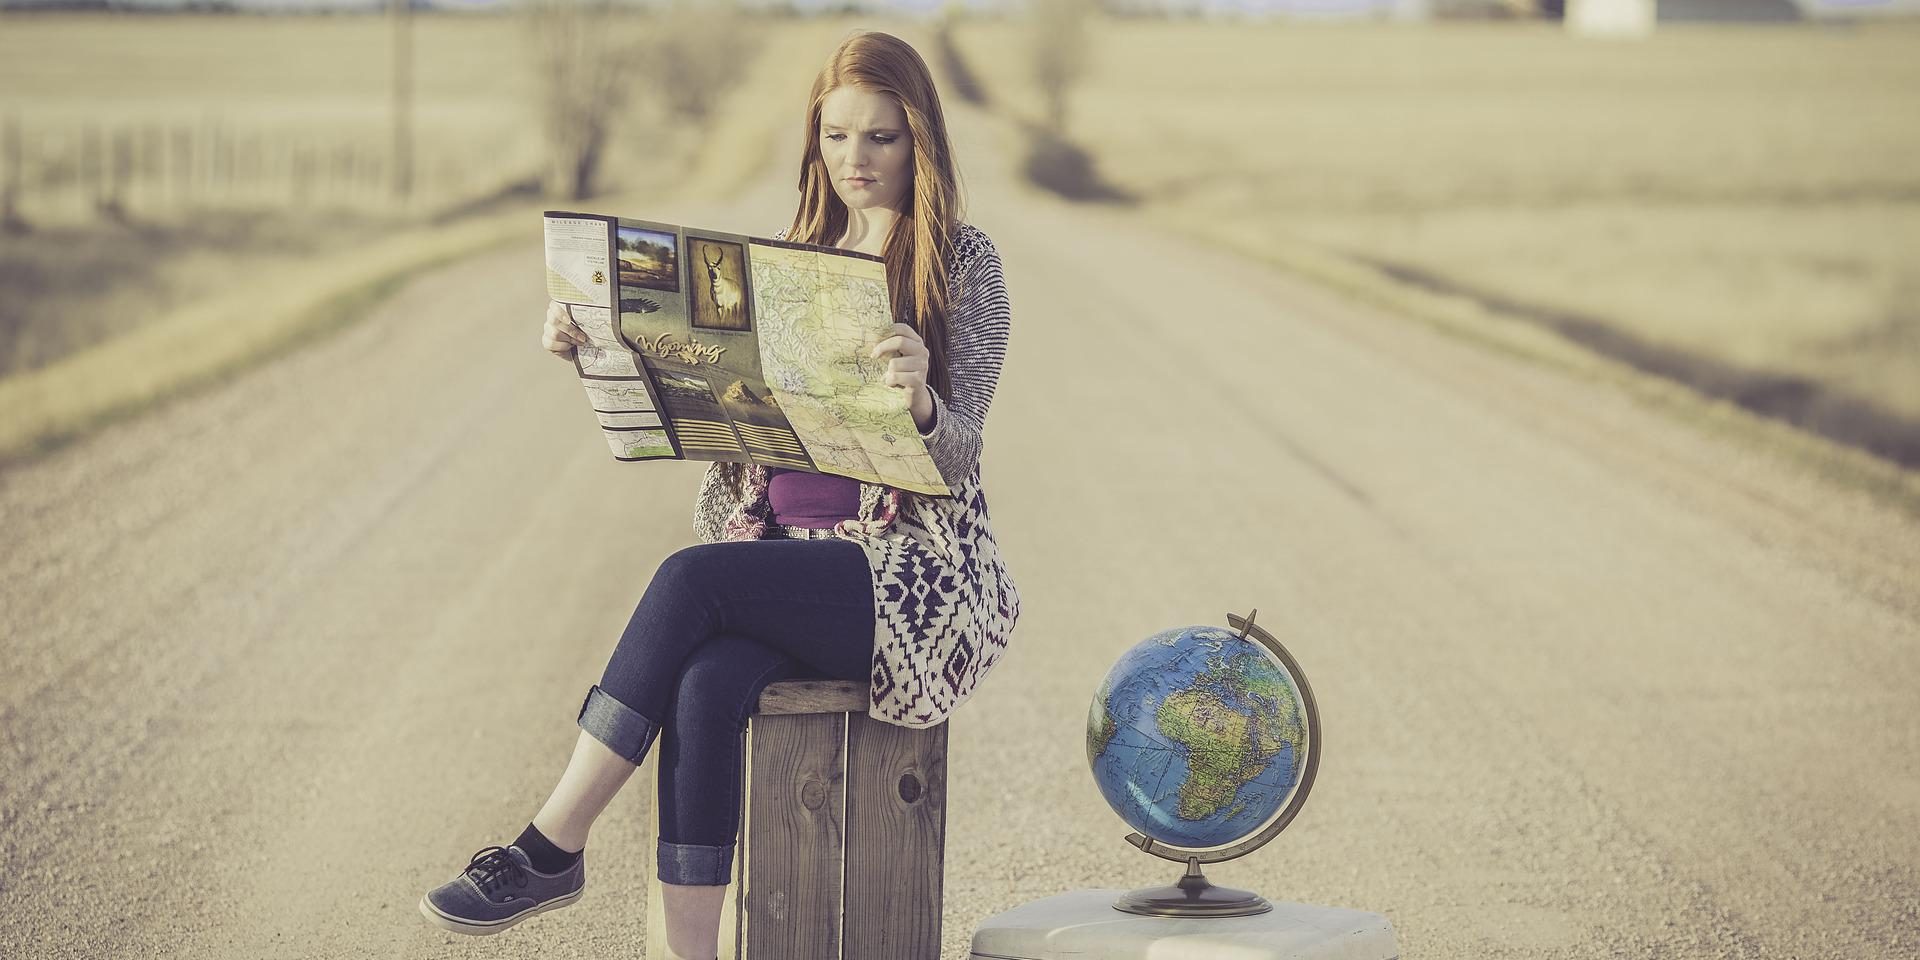 Young woman sitting on a suitcase in a middle of a road, a map in her hands.